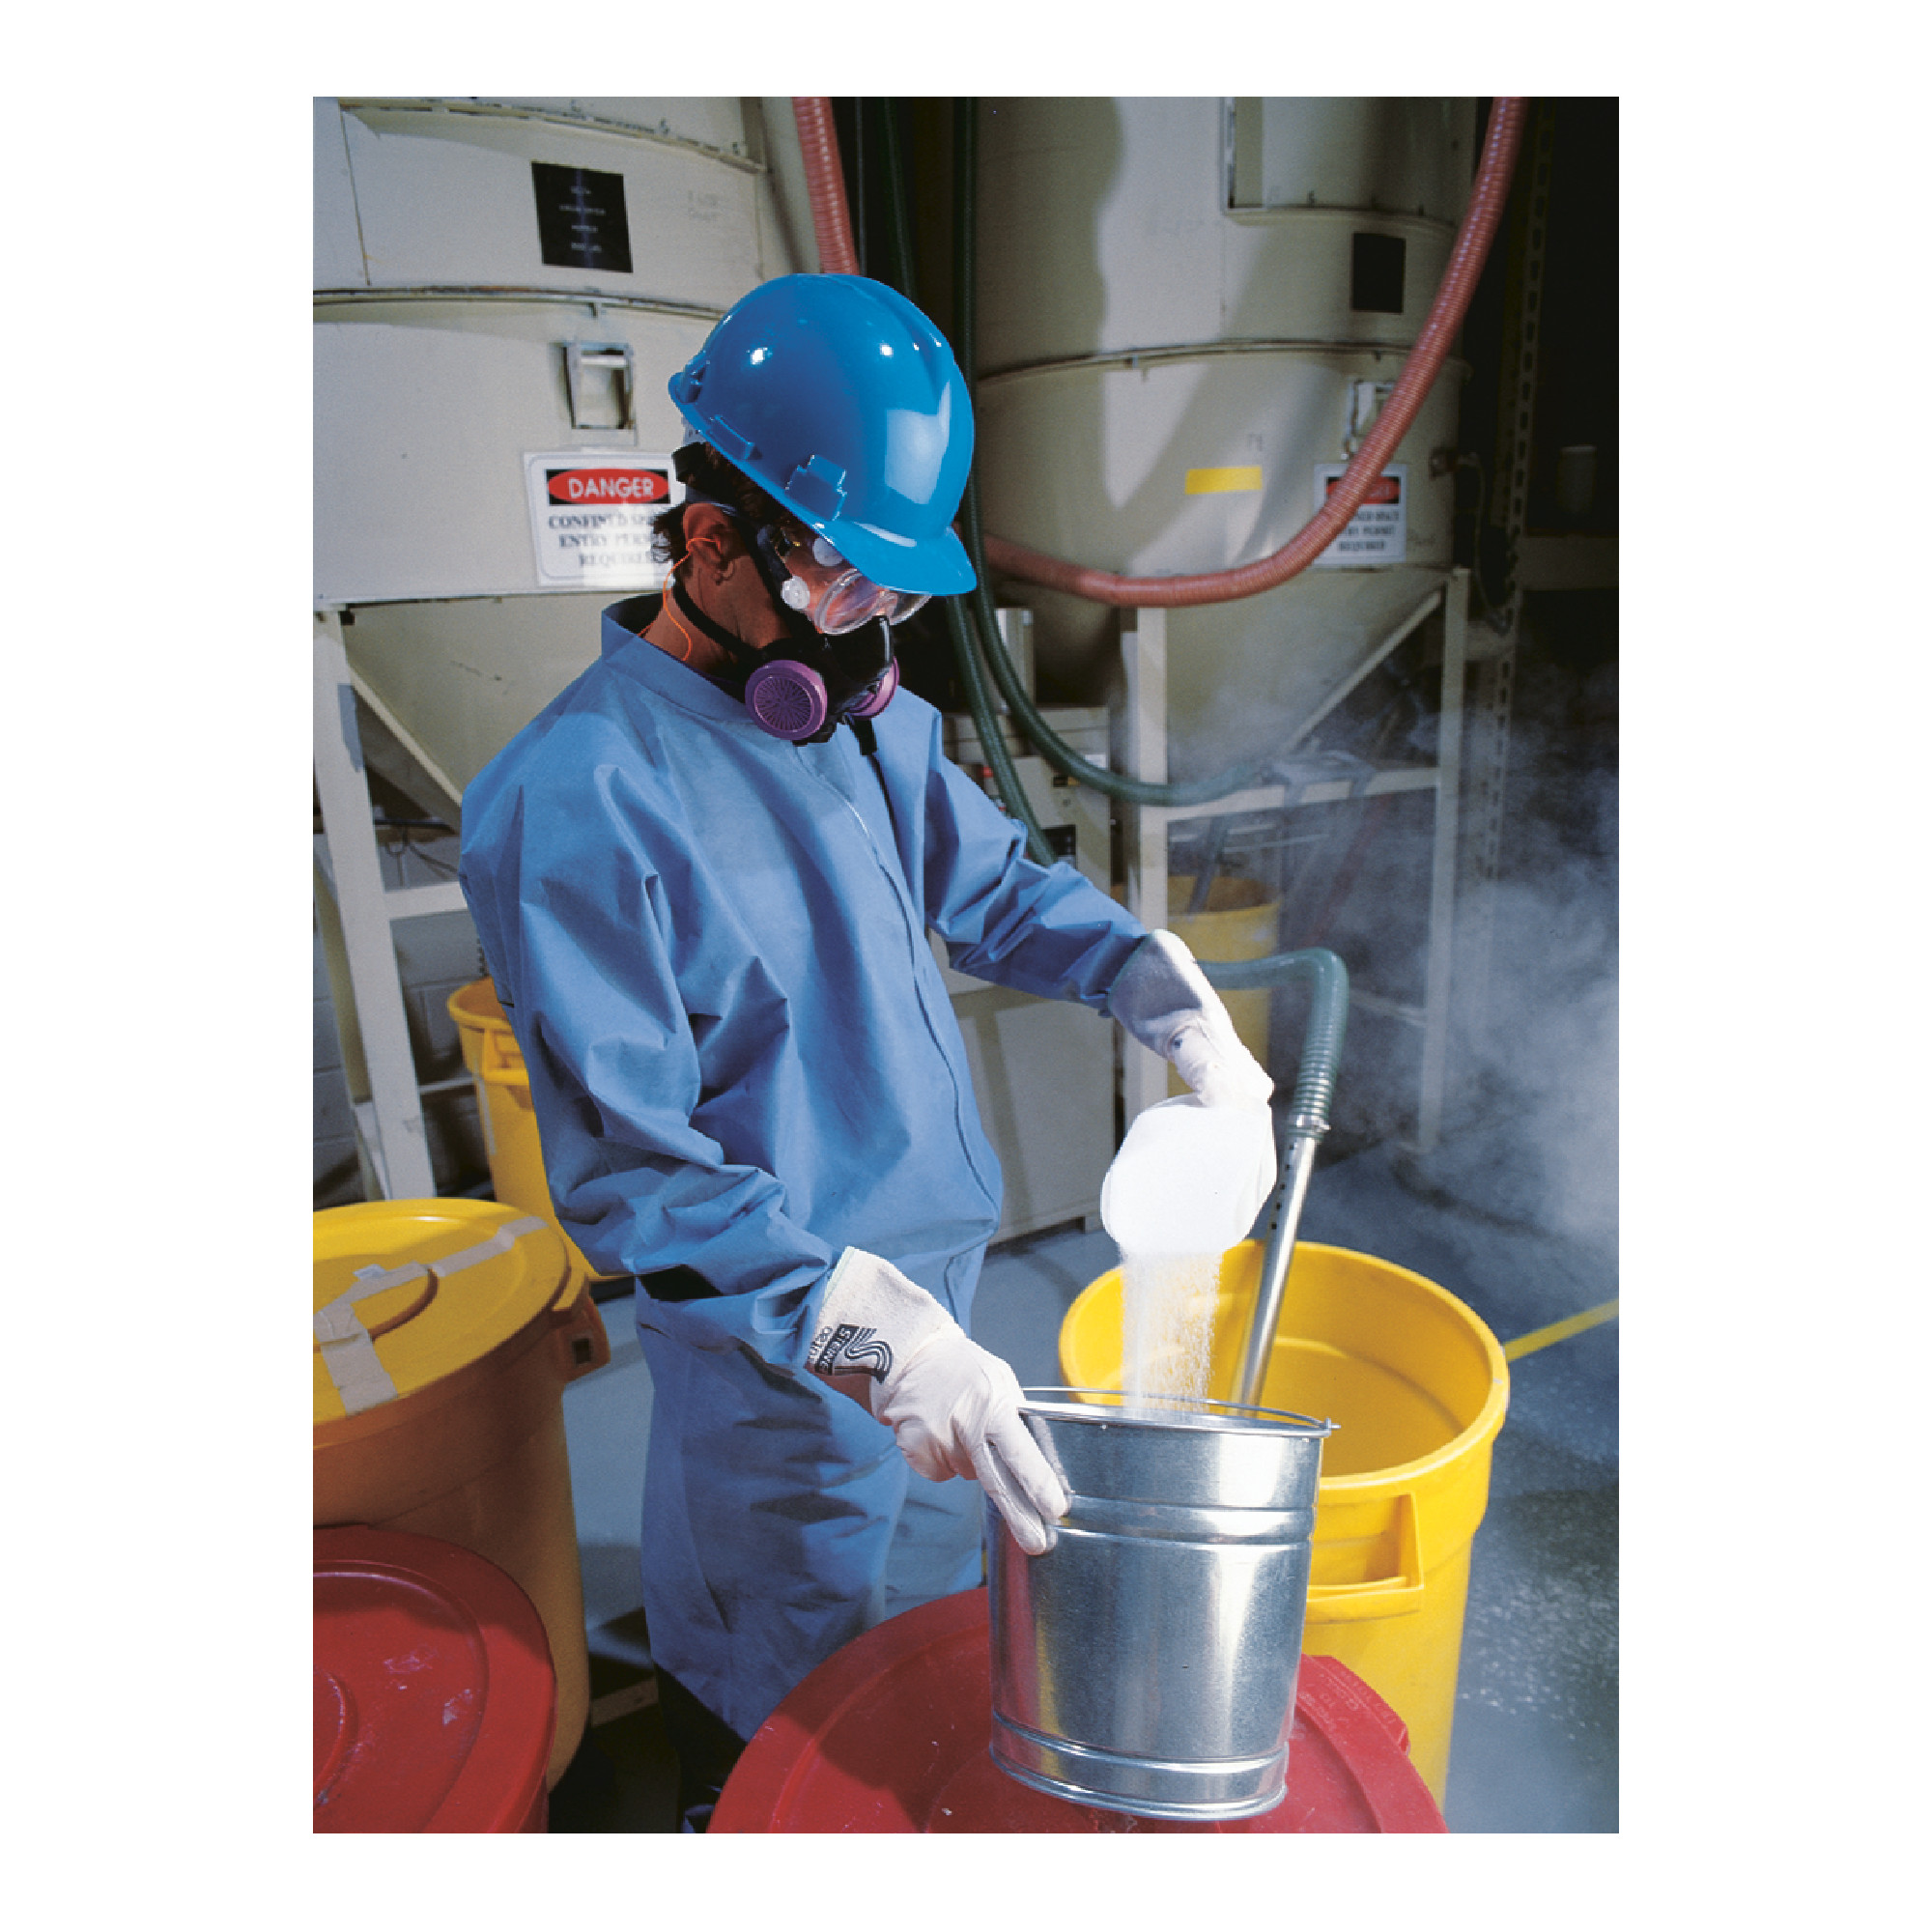 KleenGuard Disposable Coveralls